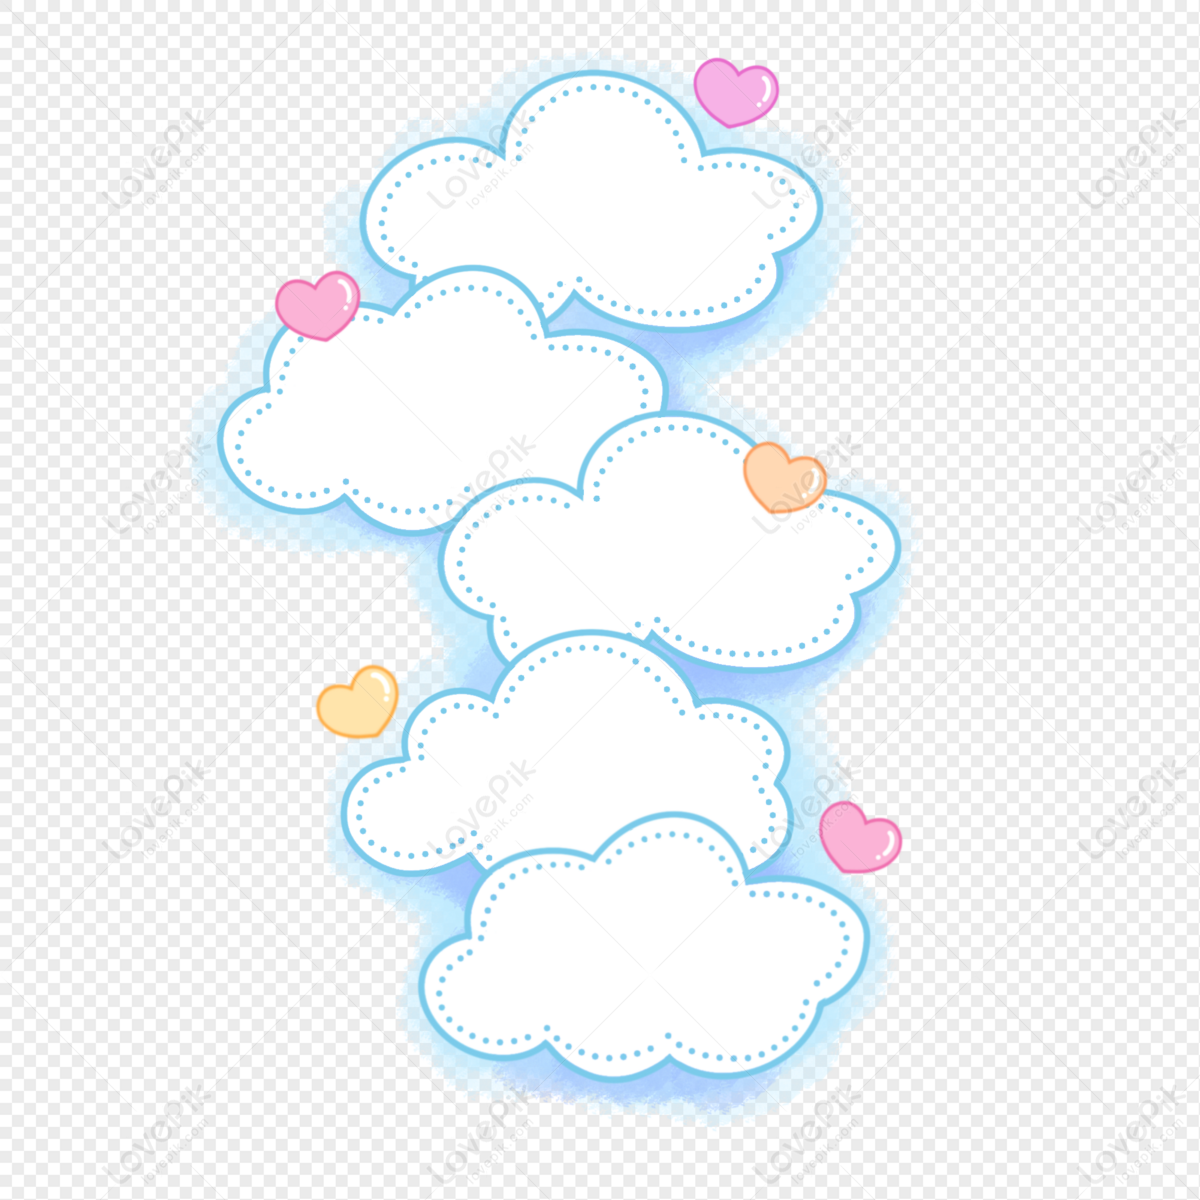 Cute Cartoon Love Cloud Border PNG Image And Clipart Image For Free  Download - Lovepik | 401444098